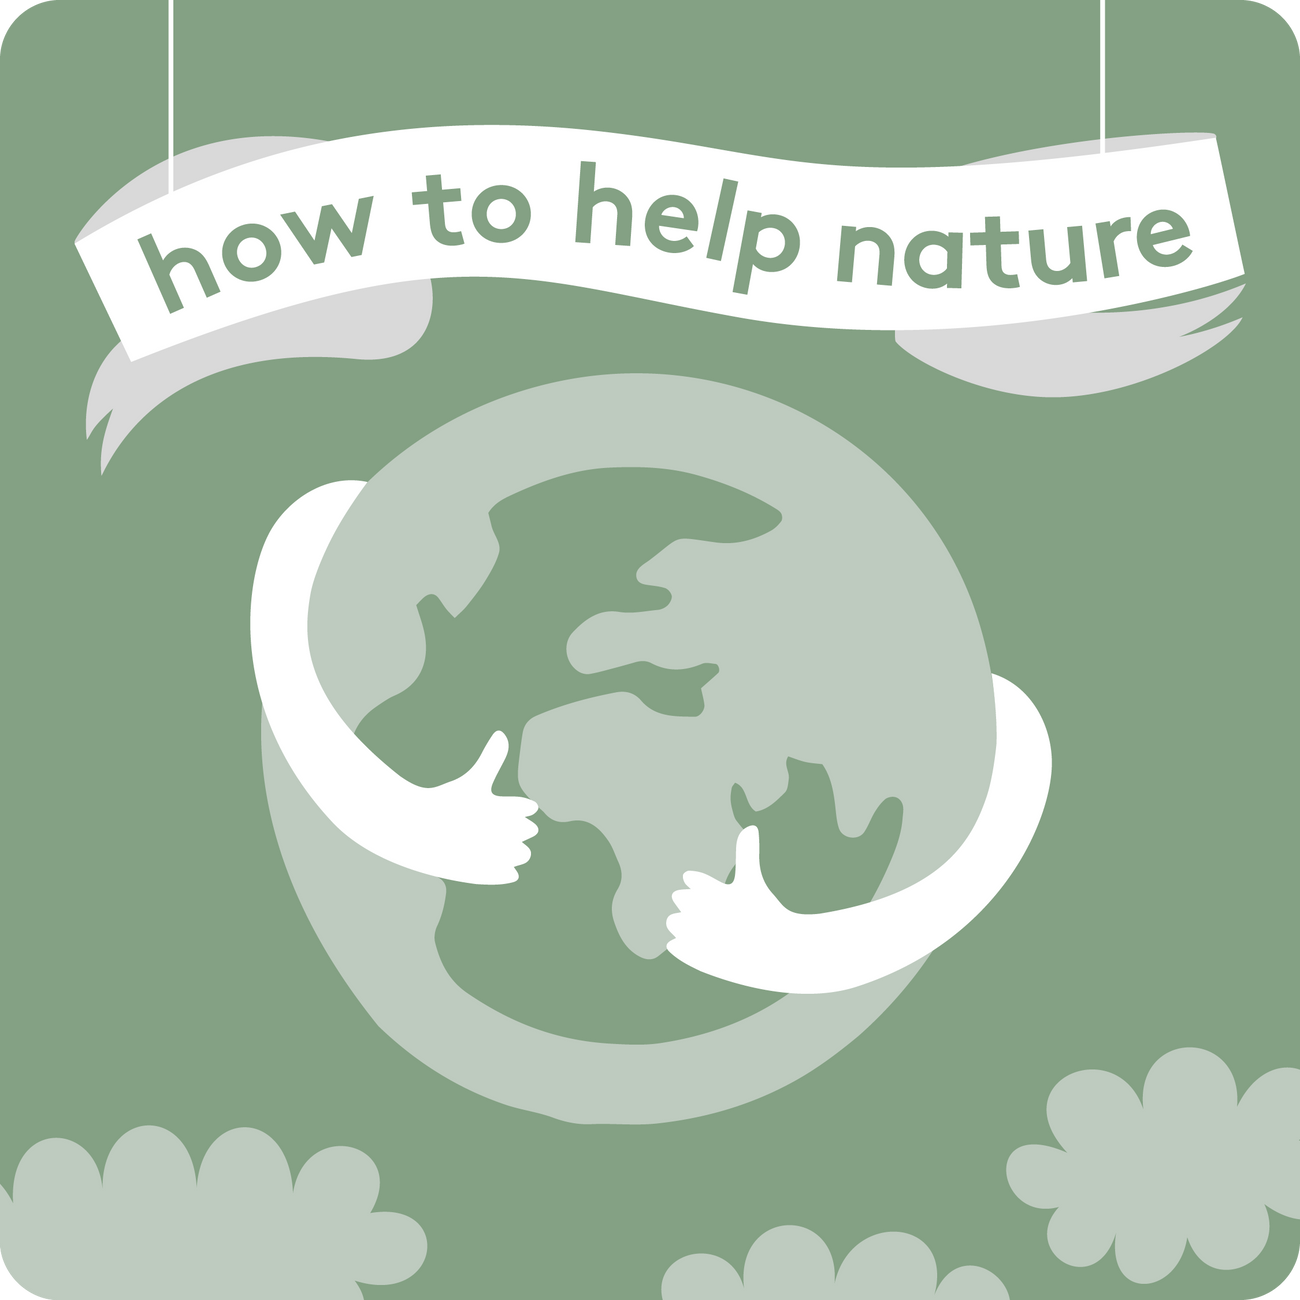 This is how you can help nature.